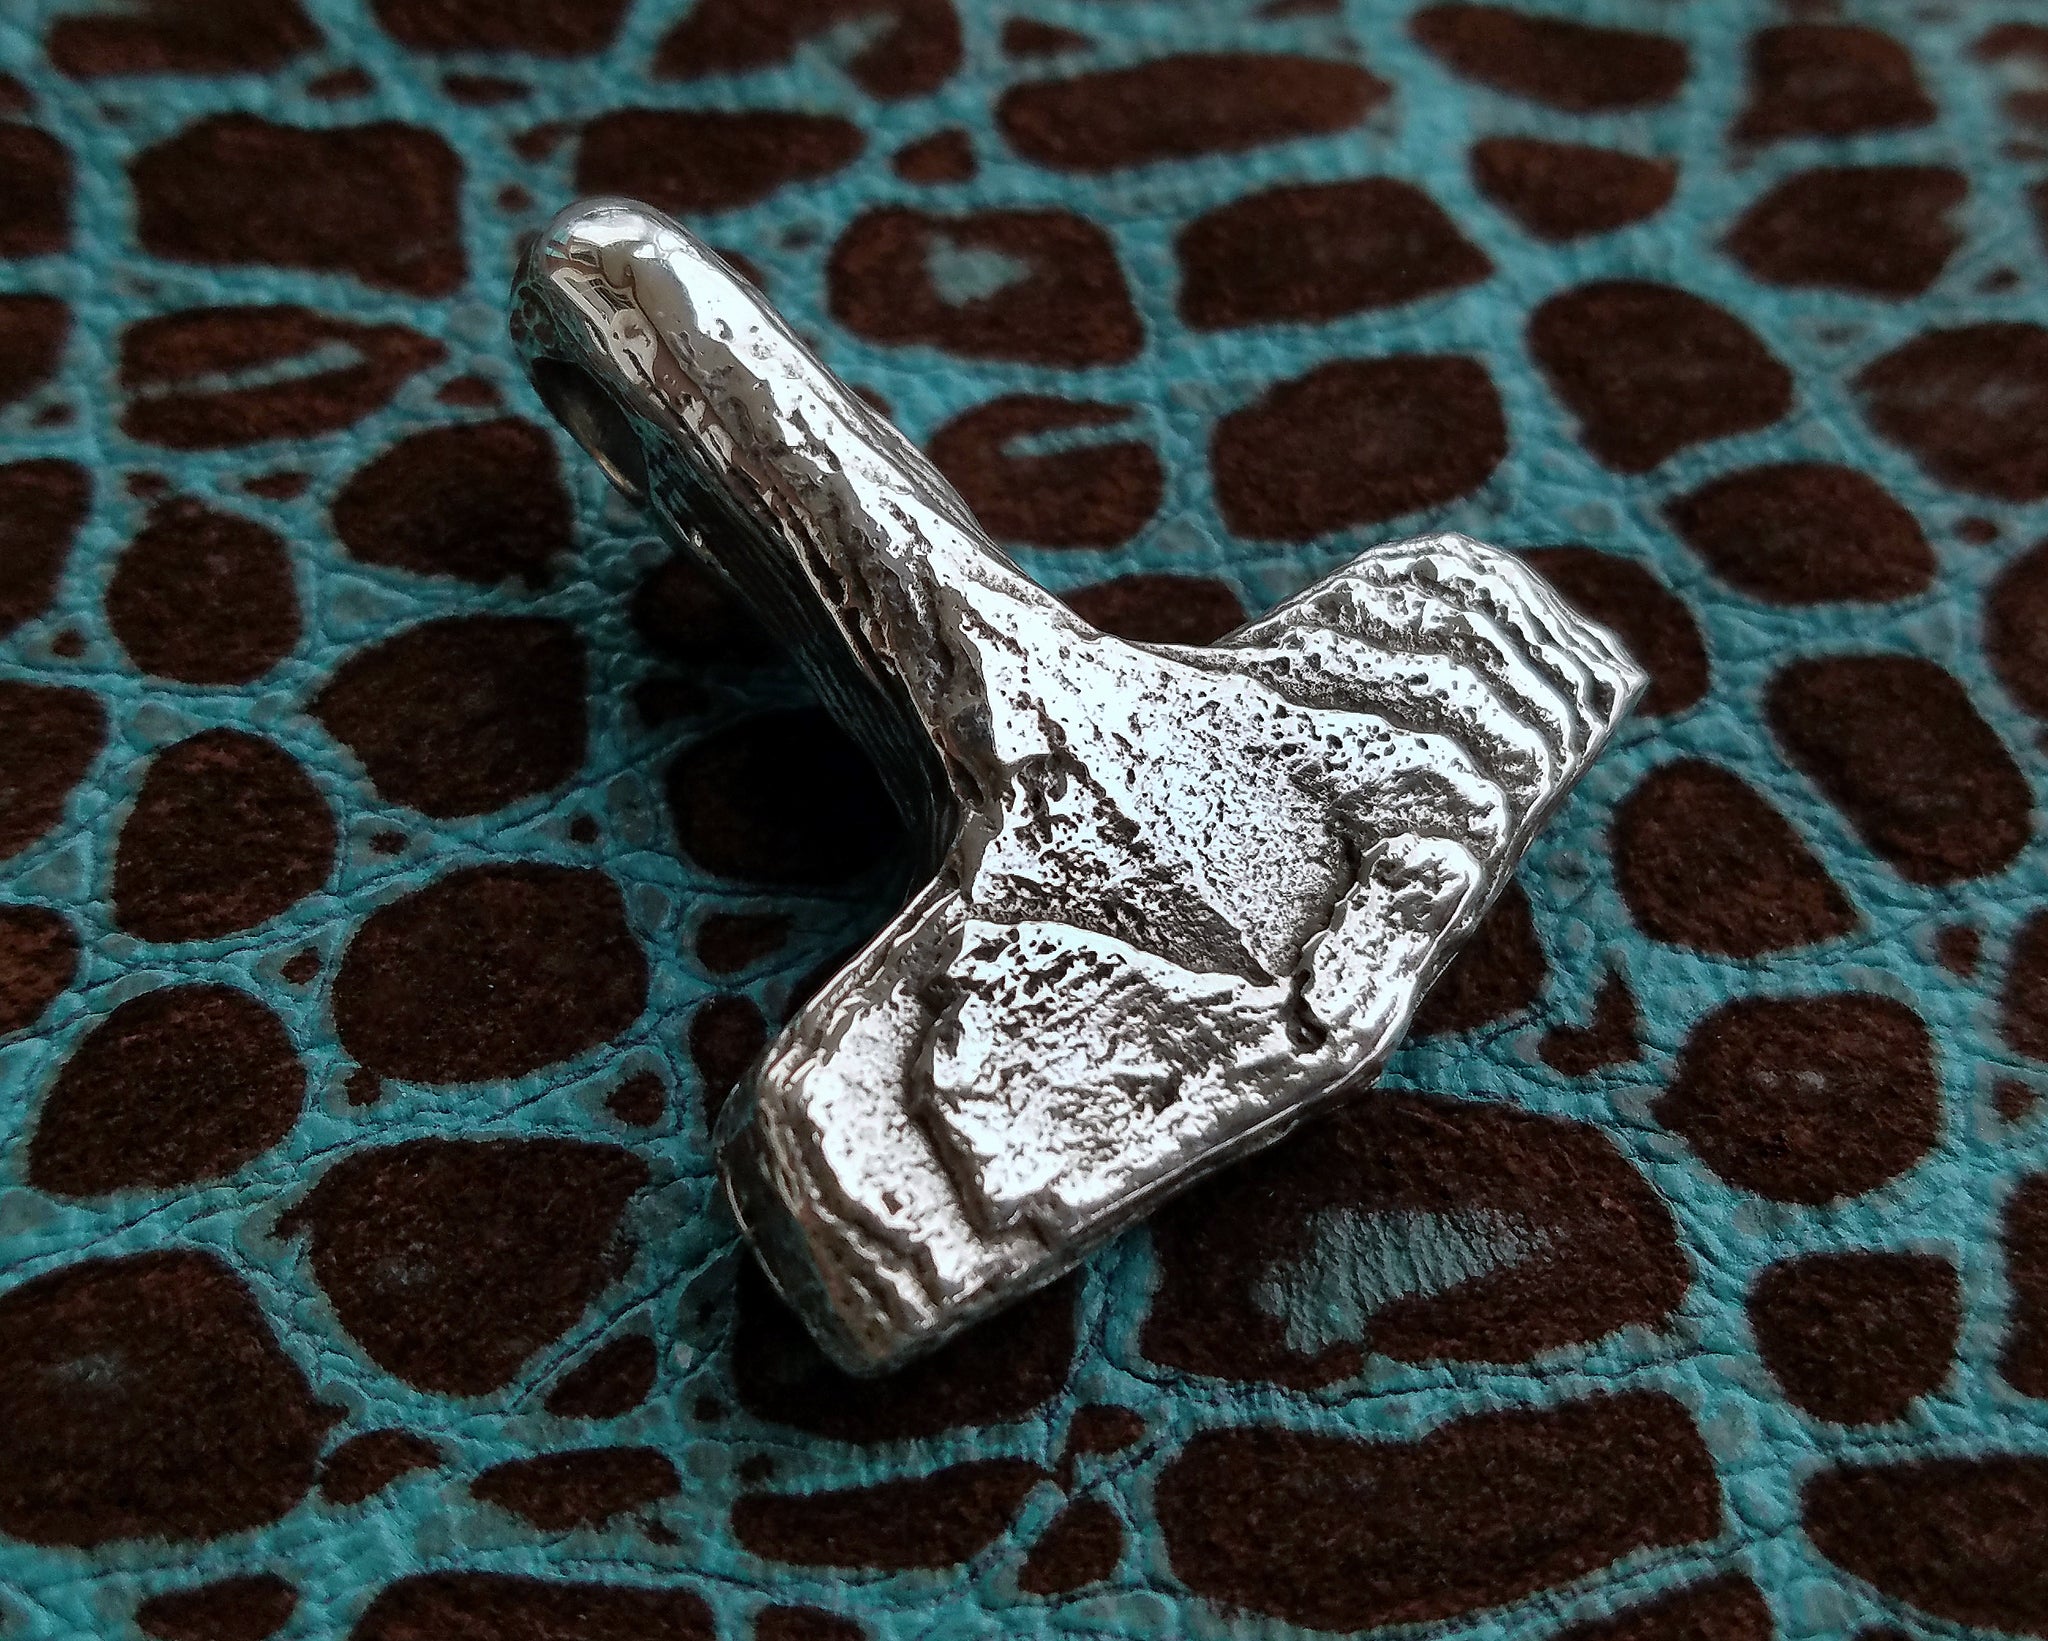 'Thor's Hammer' Hand-carved Hand-poured Cuttlefish Cast Pendant #2 by Phantom